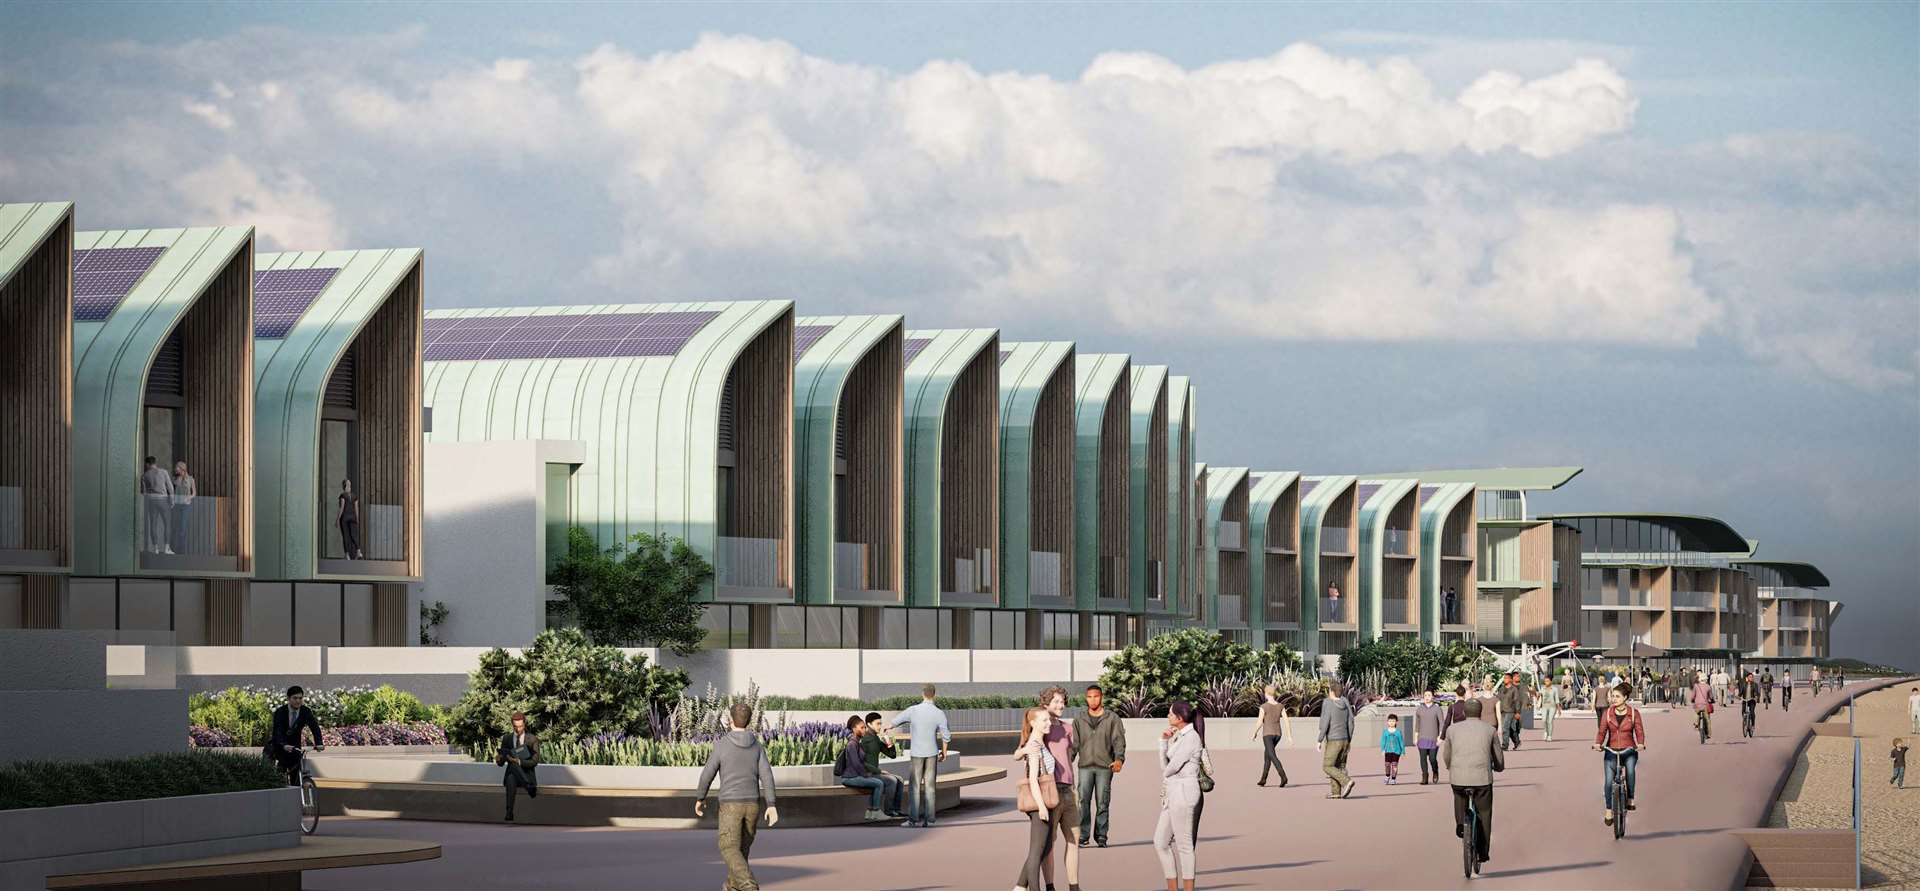 An artist's impression showing how the Princes Parade development could have looked